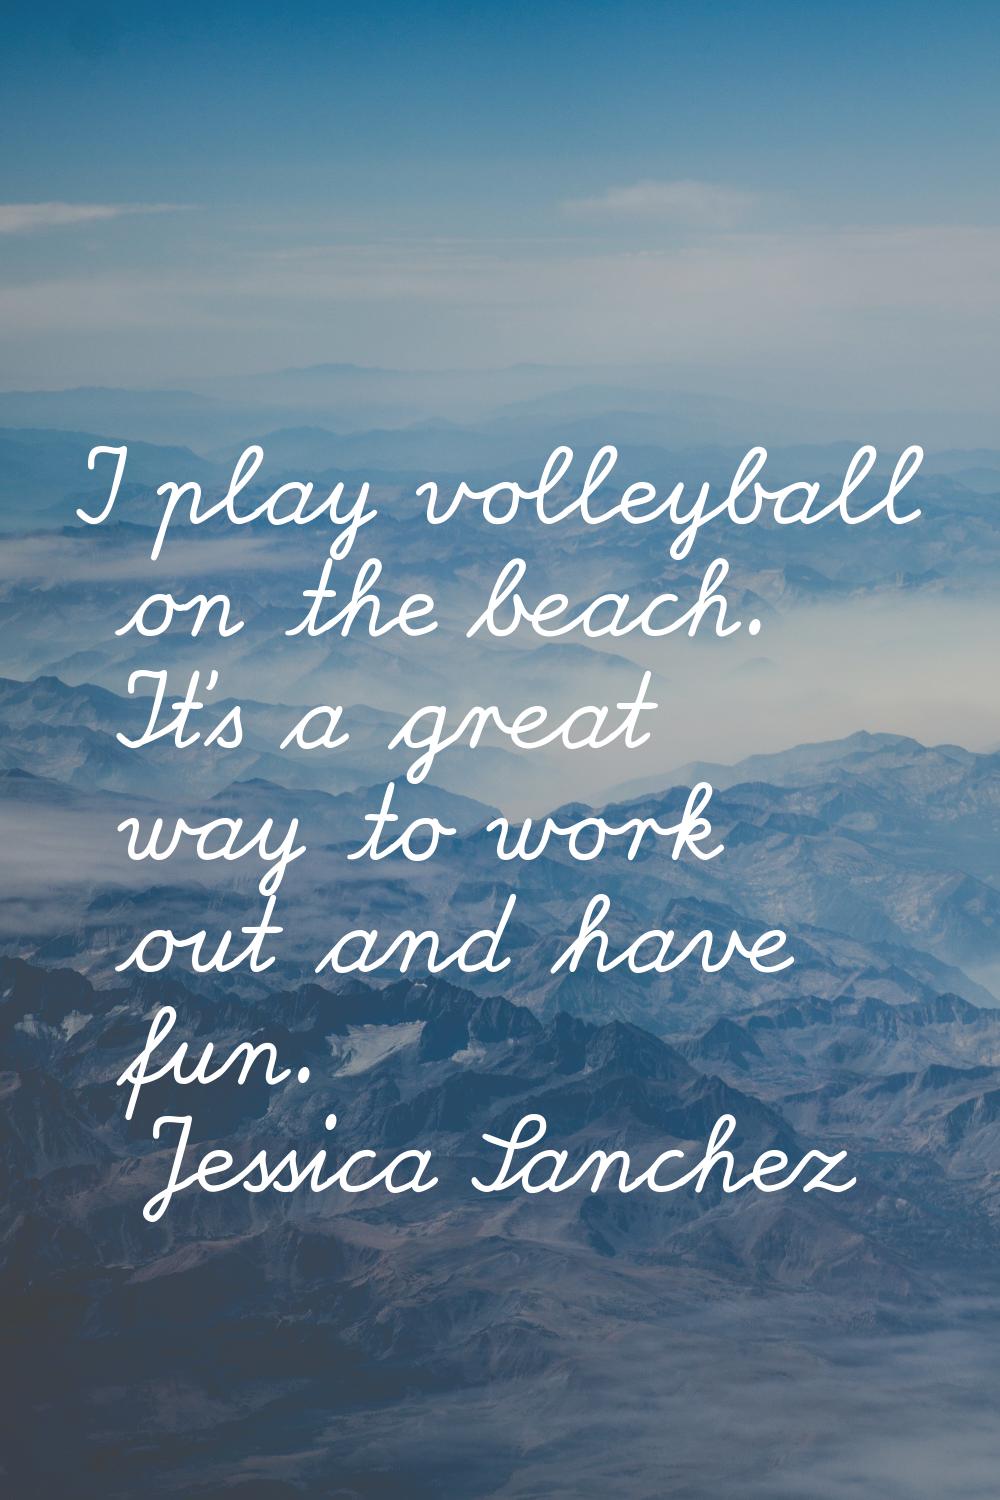 I play volleyball on the beach. It's a great way to work out and have fun.